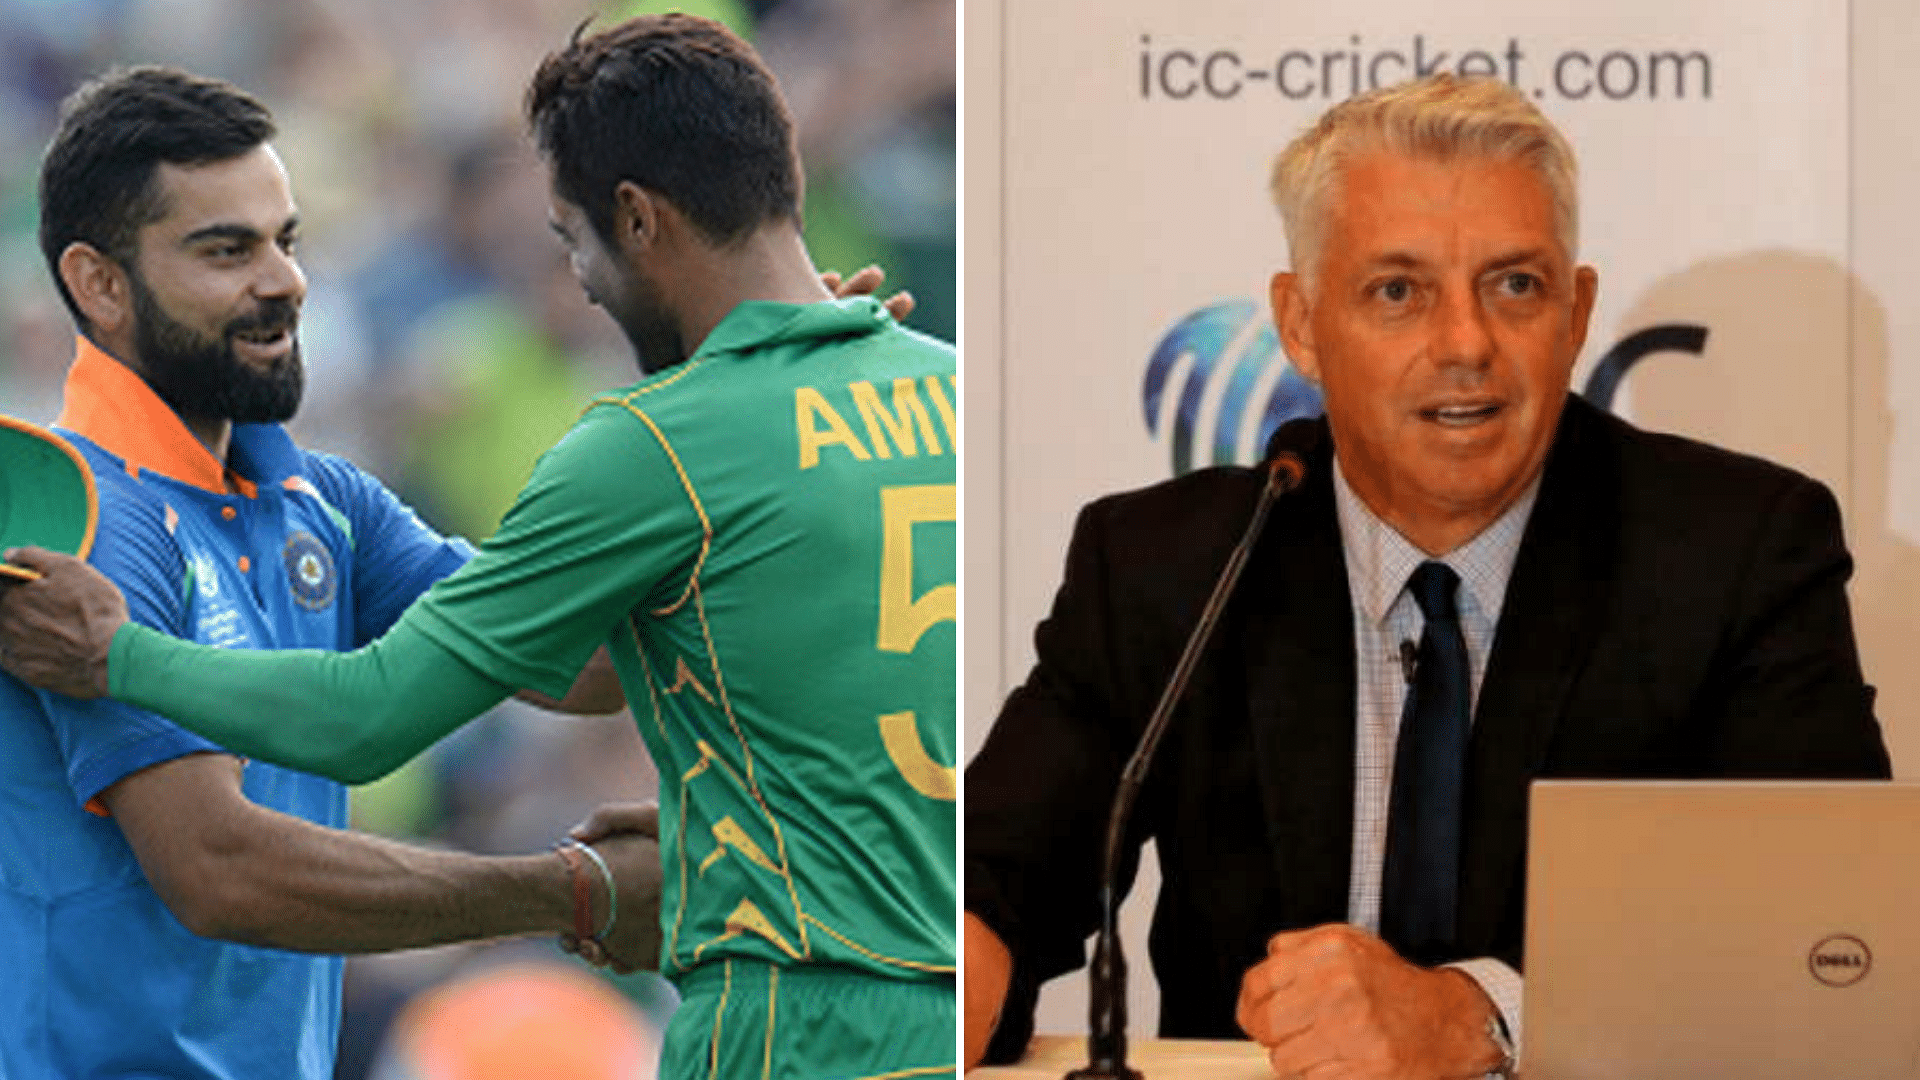 ICC CEO Dave Richardson has said there is no threat to the India-Pakistan clash at the ICC World Cup 2019 as both teams are contractually bound to play.